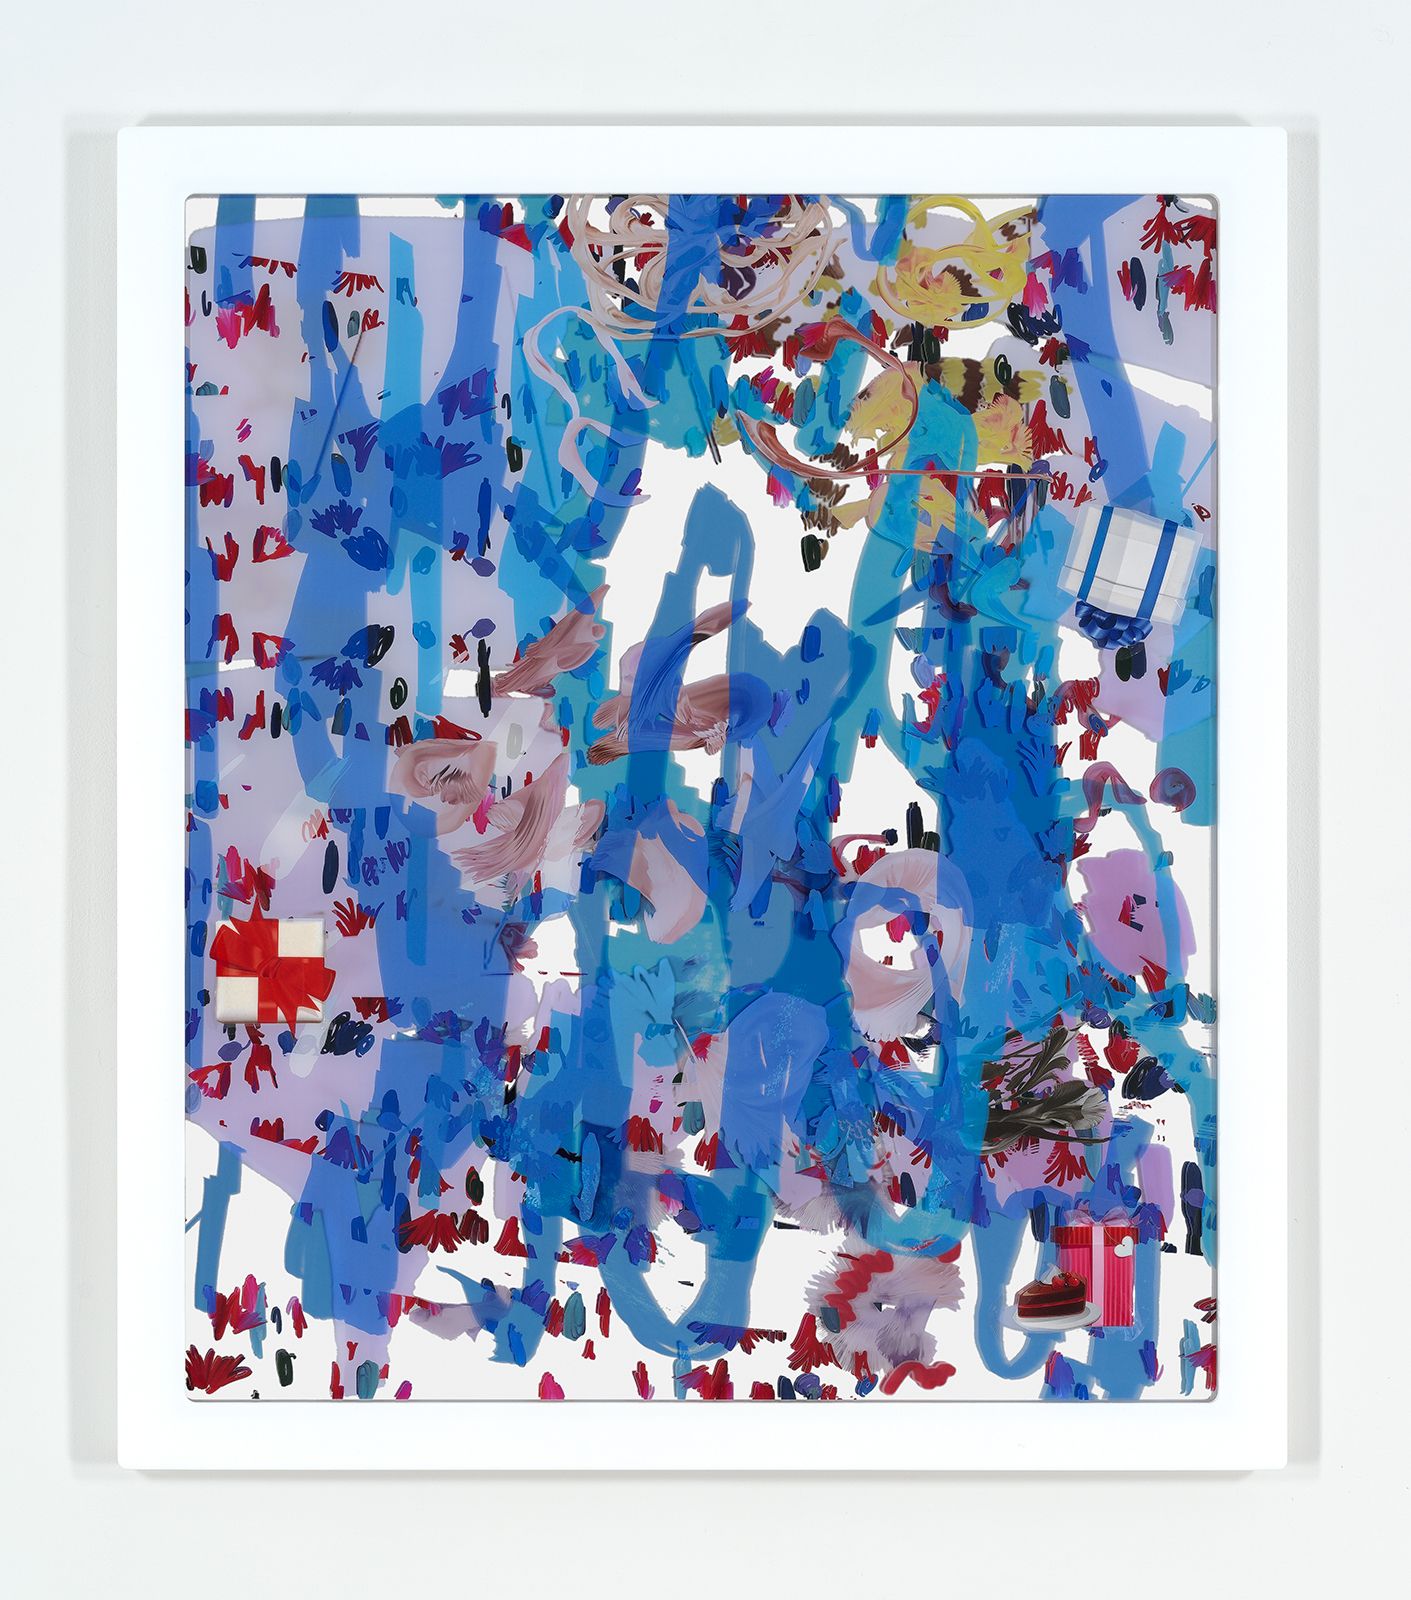 Petra Cortright, française de kayak+cleanup, 2015, digital painting, UV print on clear acrylic, stickers, mounted on mirrored acrylic, 54 1⁄2 × 47 1⁄2 × 1 1⁄4 in.